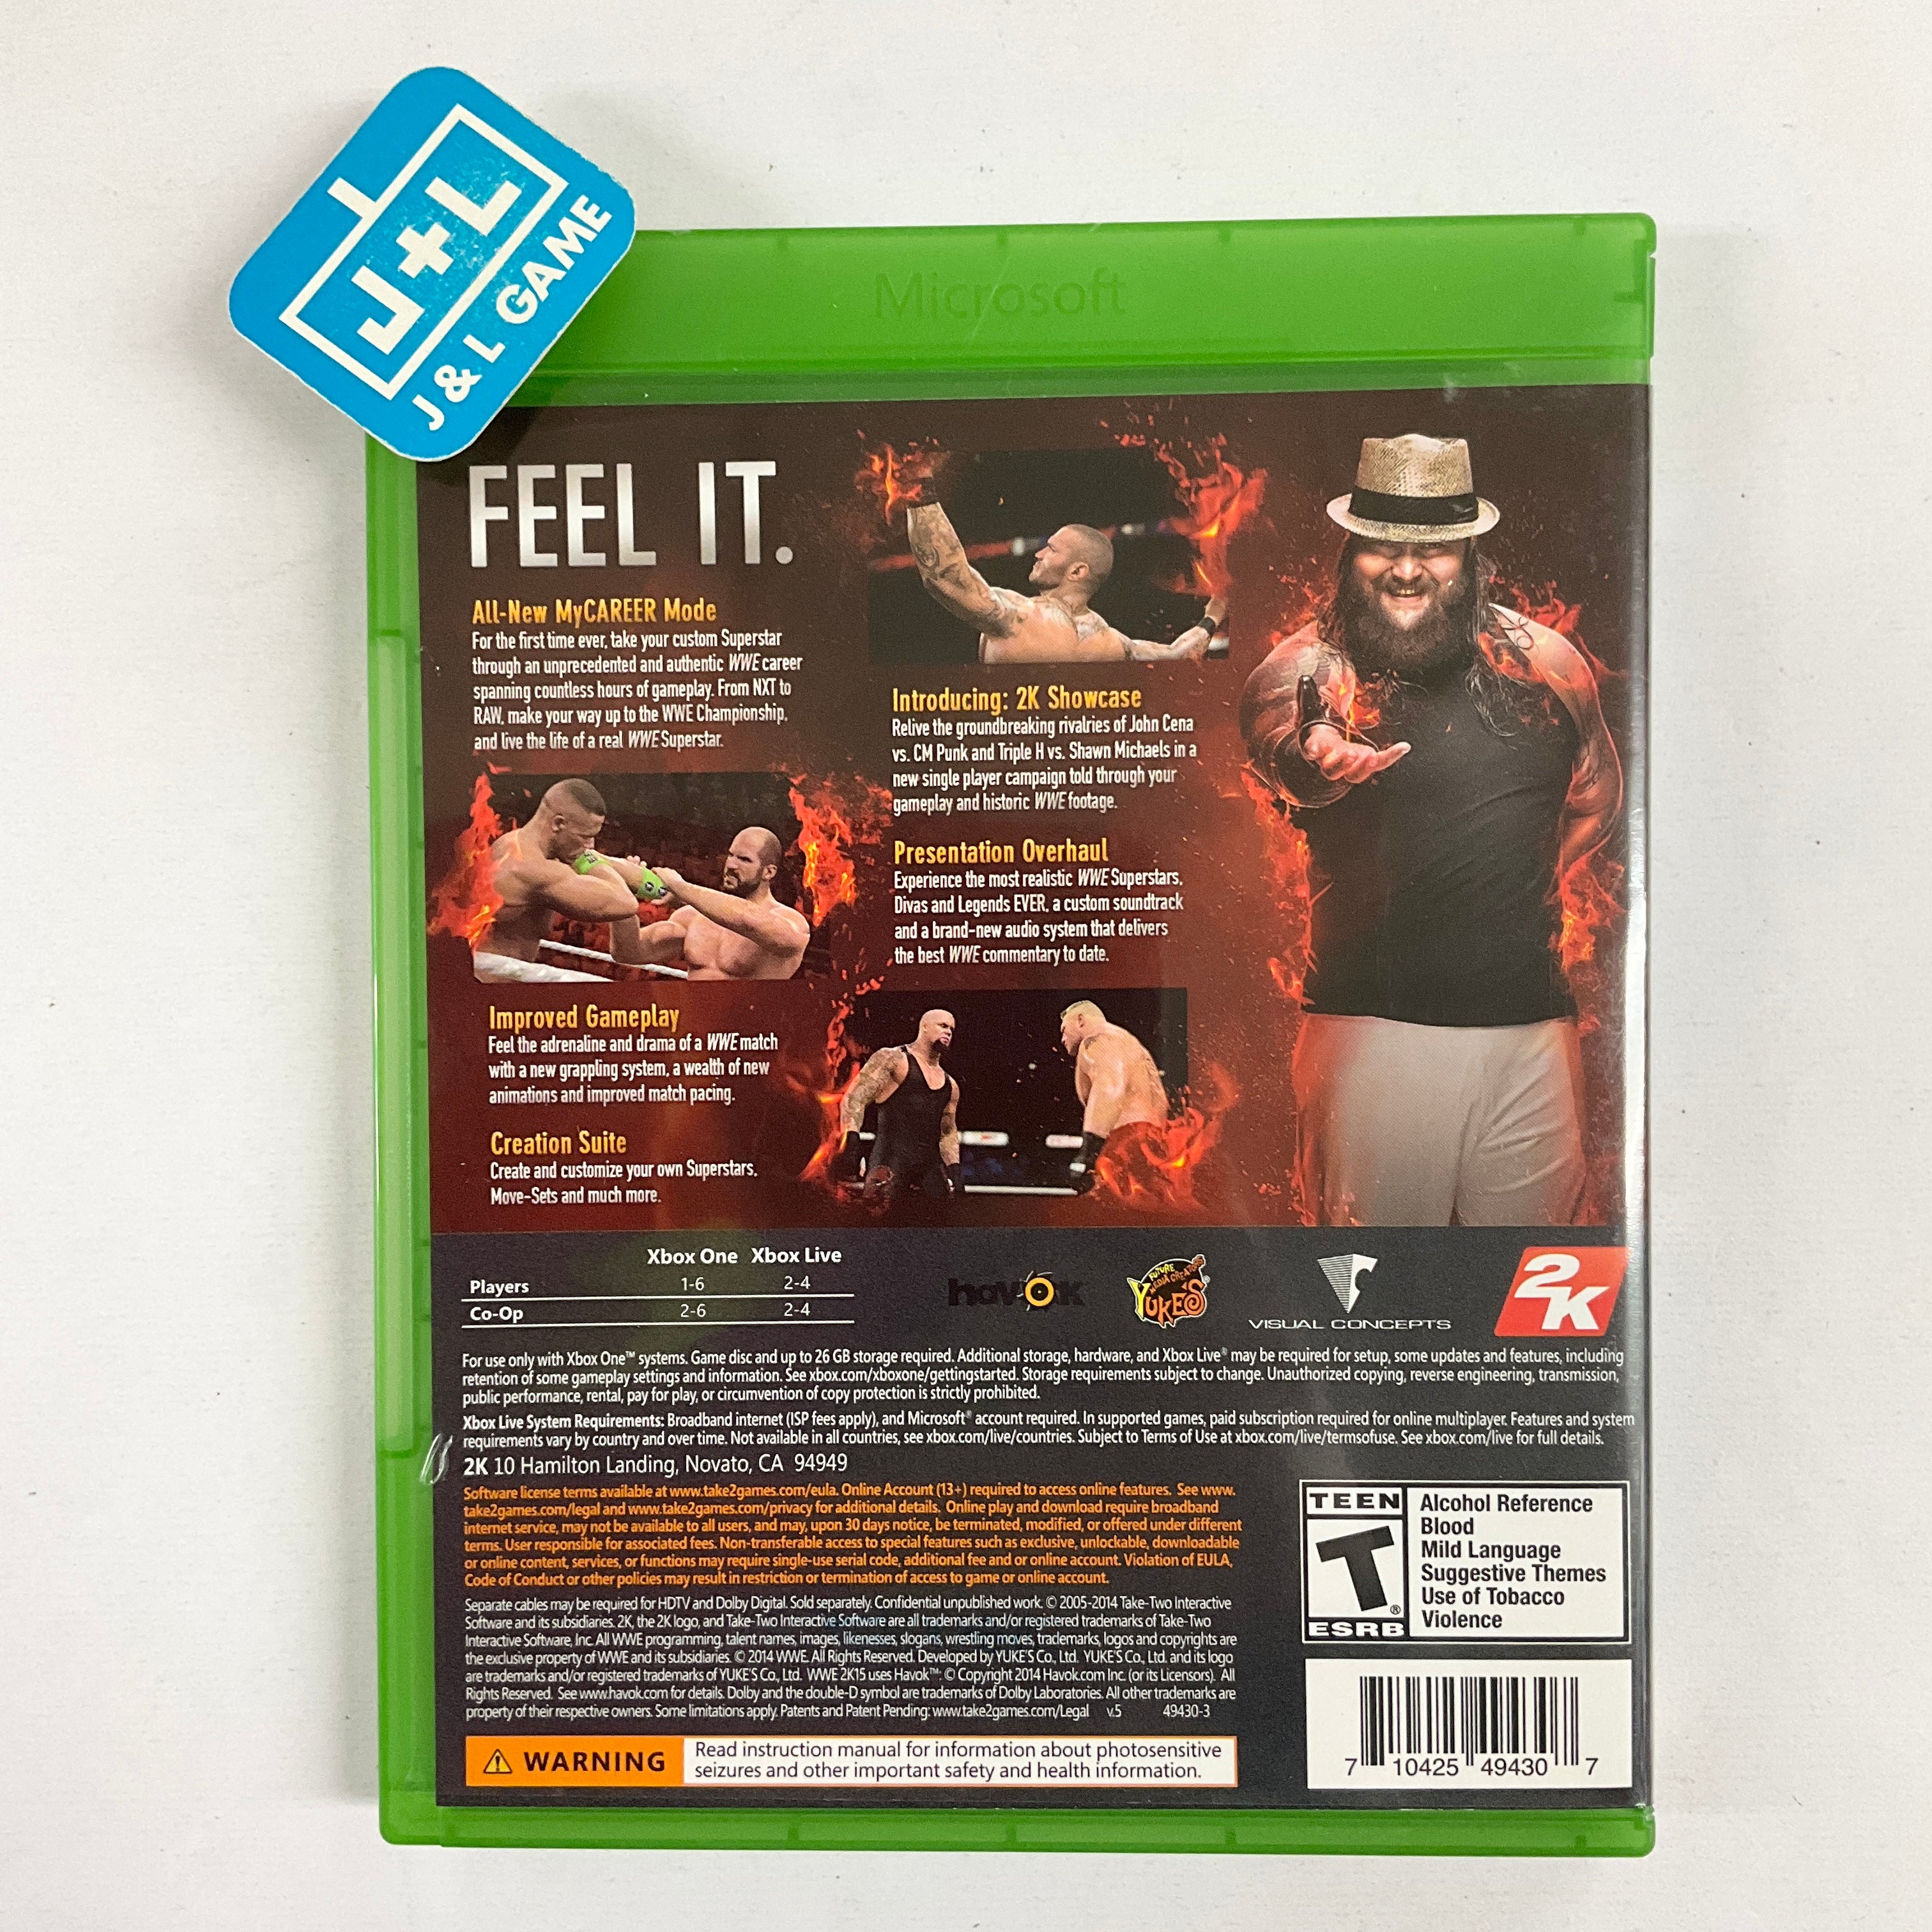 WWE 2K15 - (XB1) Xbox One [Pre-Owned] Video Games 2K Sports   